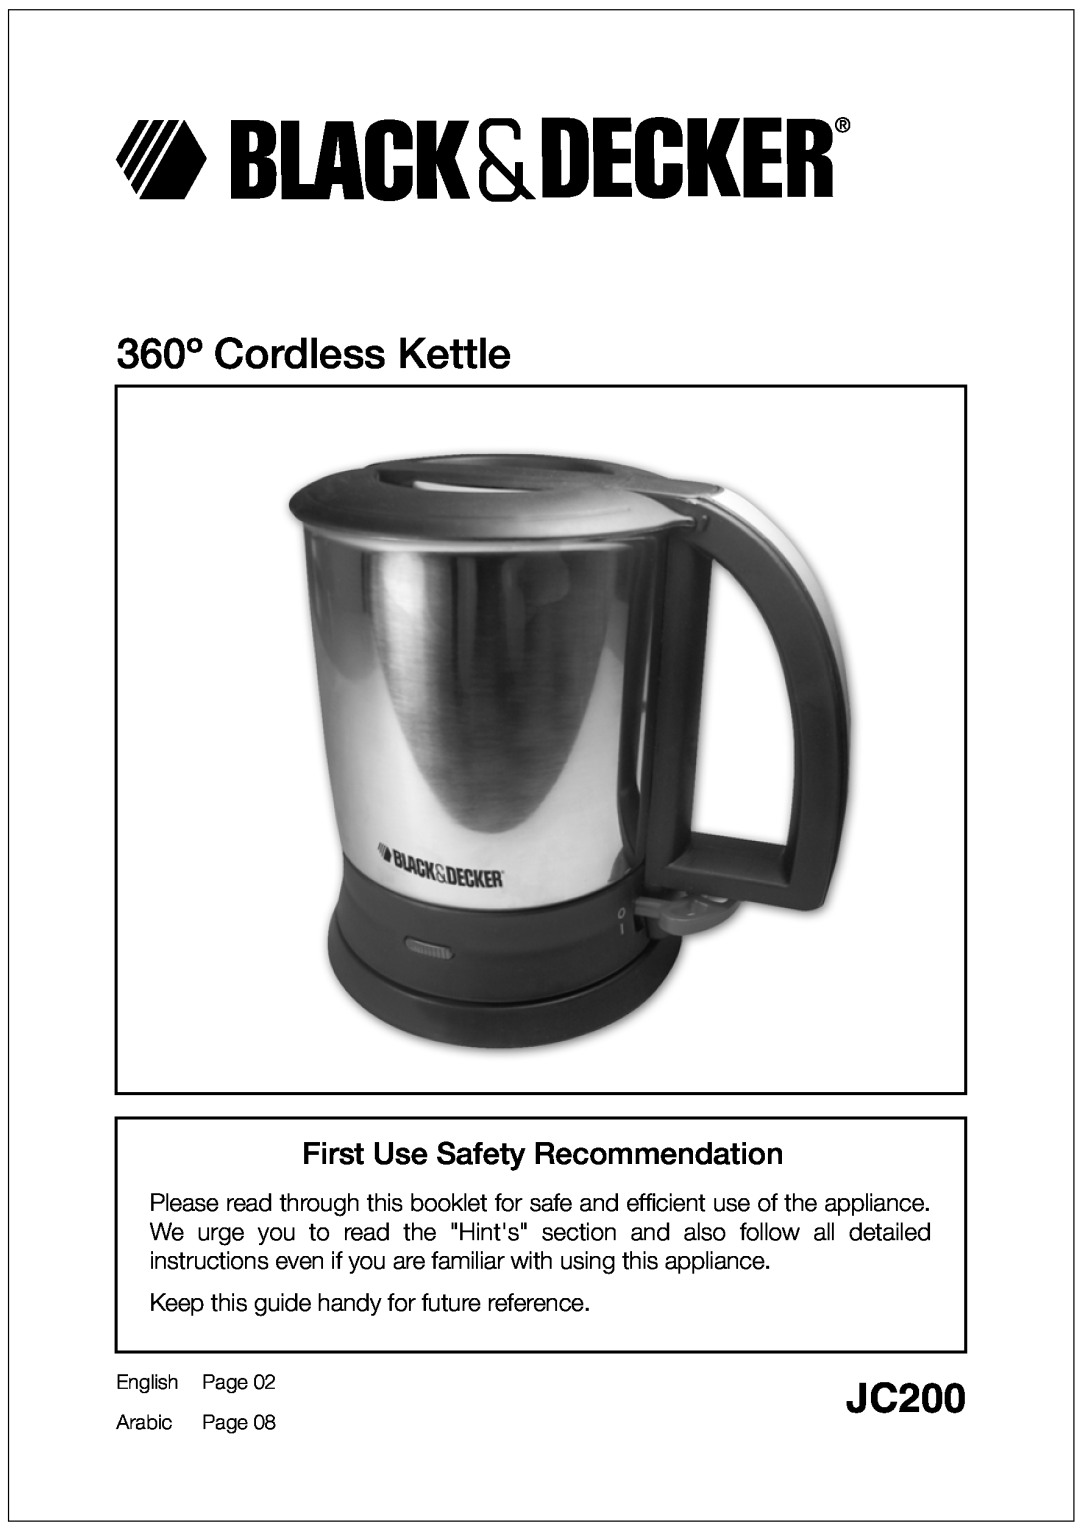 Black & Decker JC200 manual 360º Cordless Kettle, First Use Safety Recommendation 